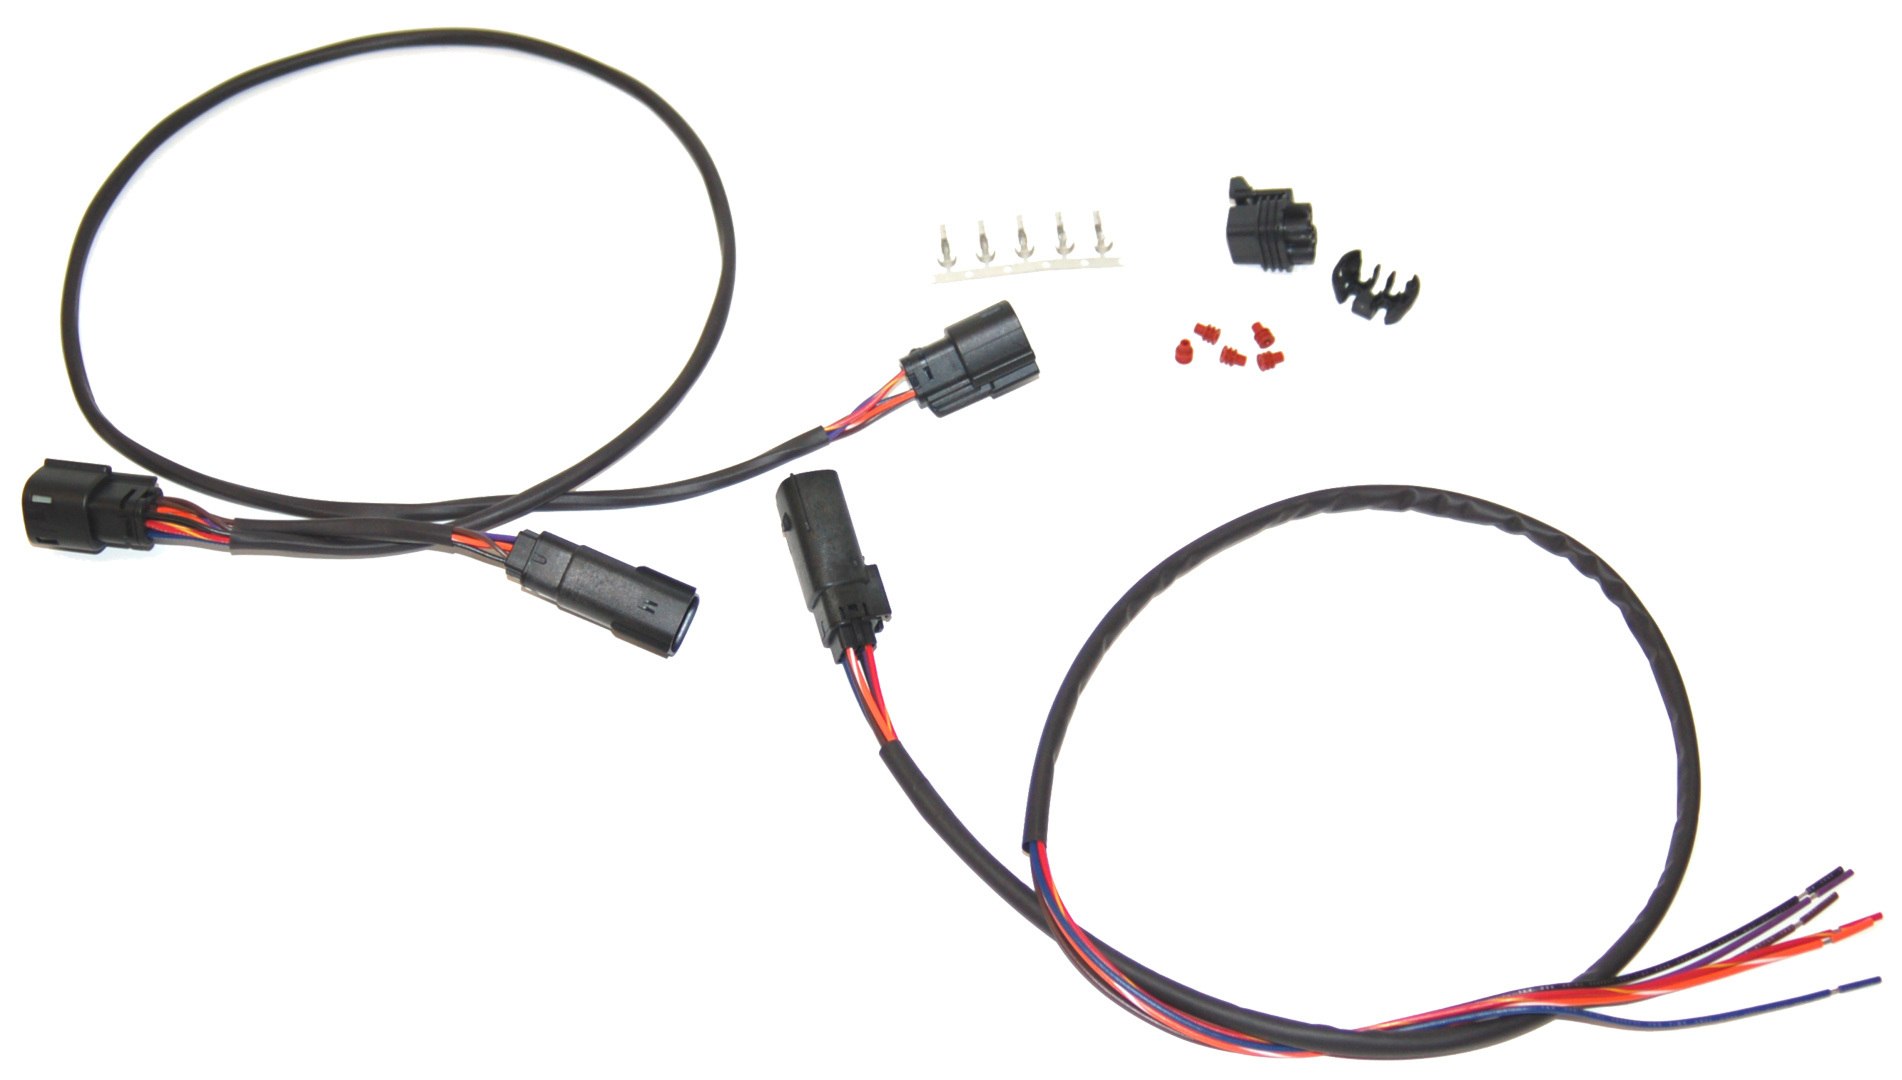 Namz Custom Cycle Products - Complete Tour Pack Wiring Instrument Kit Flhx/fltr 10-13 - NCTP-WKSR